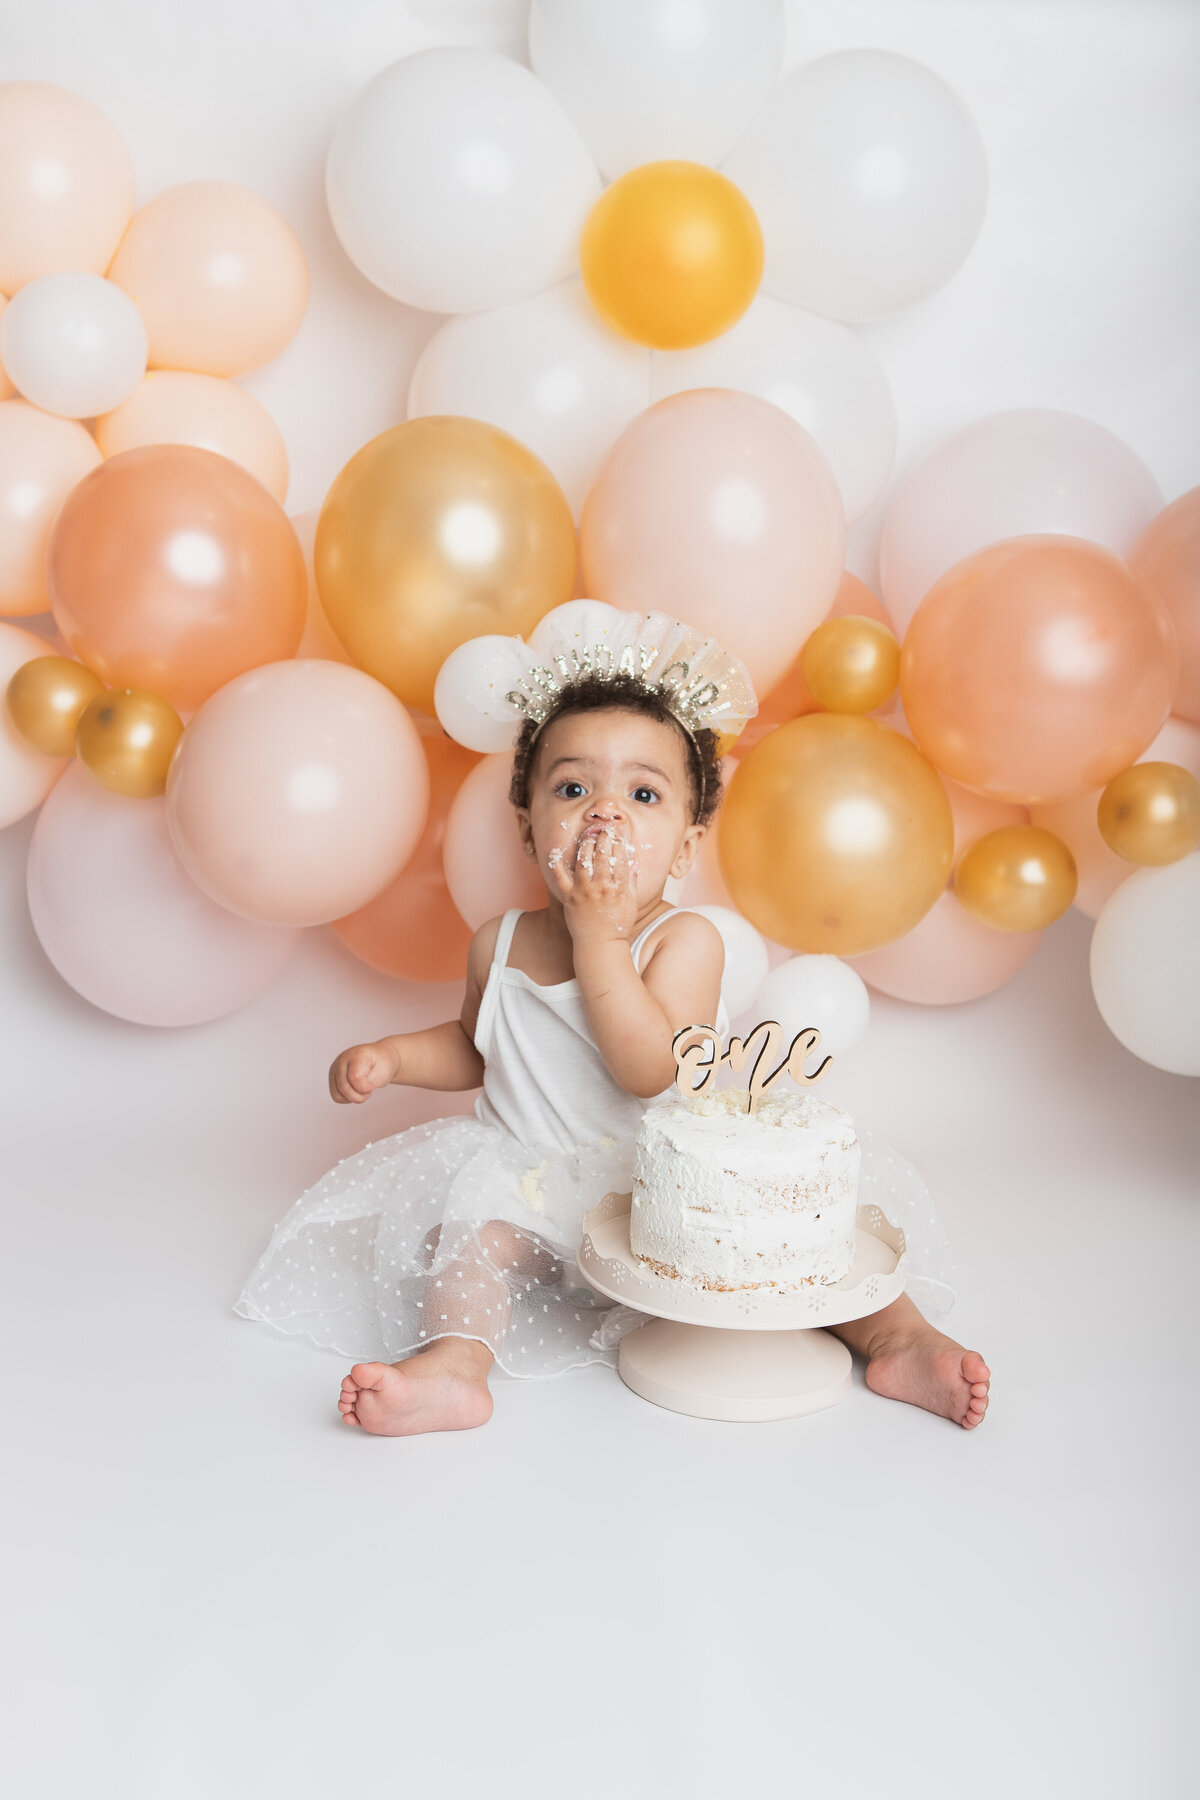 Baby eating a messy white cake with a peach balloon garland